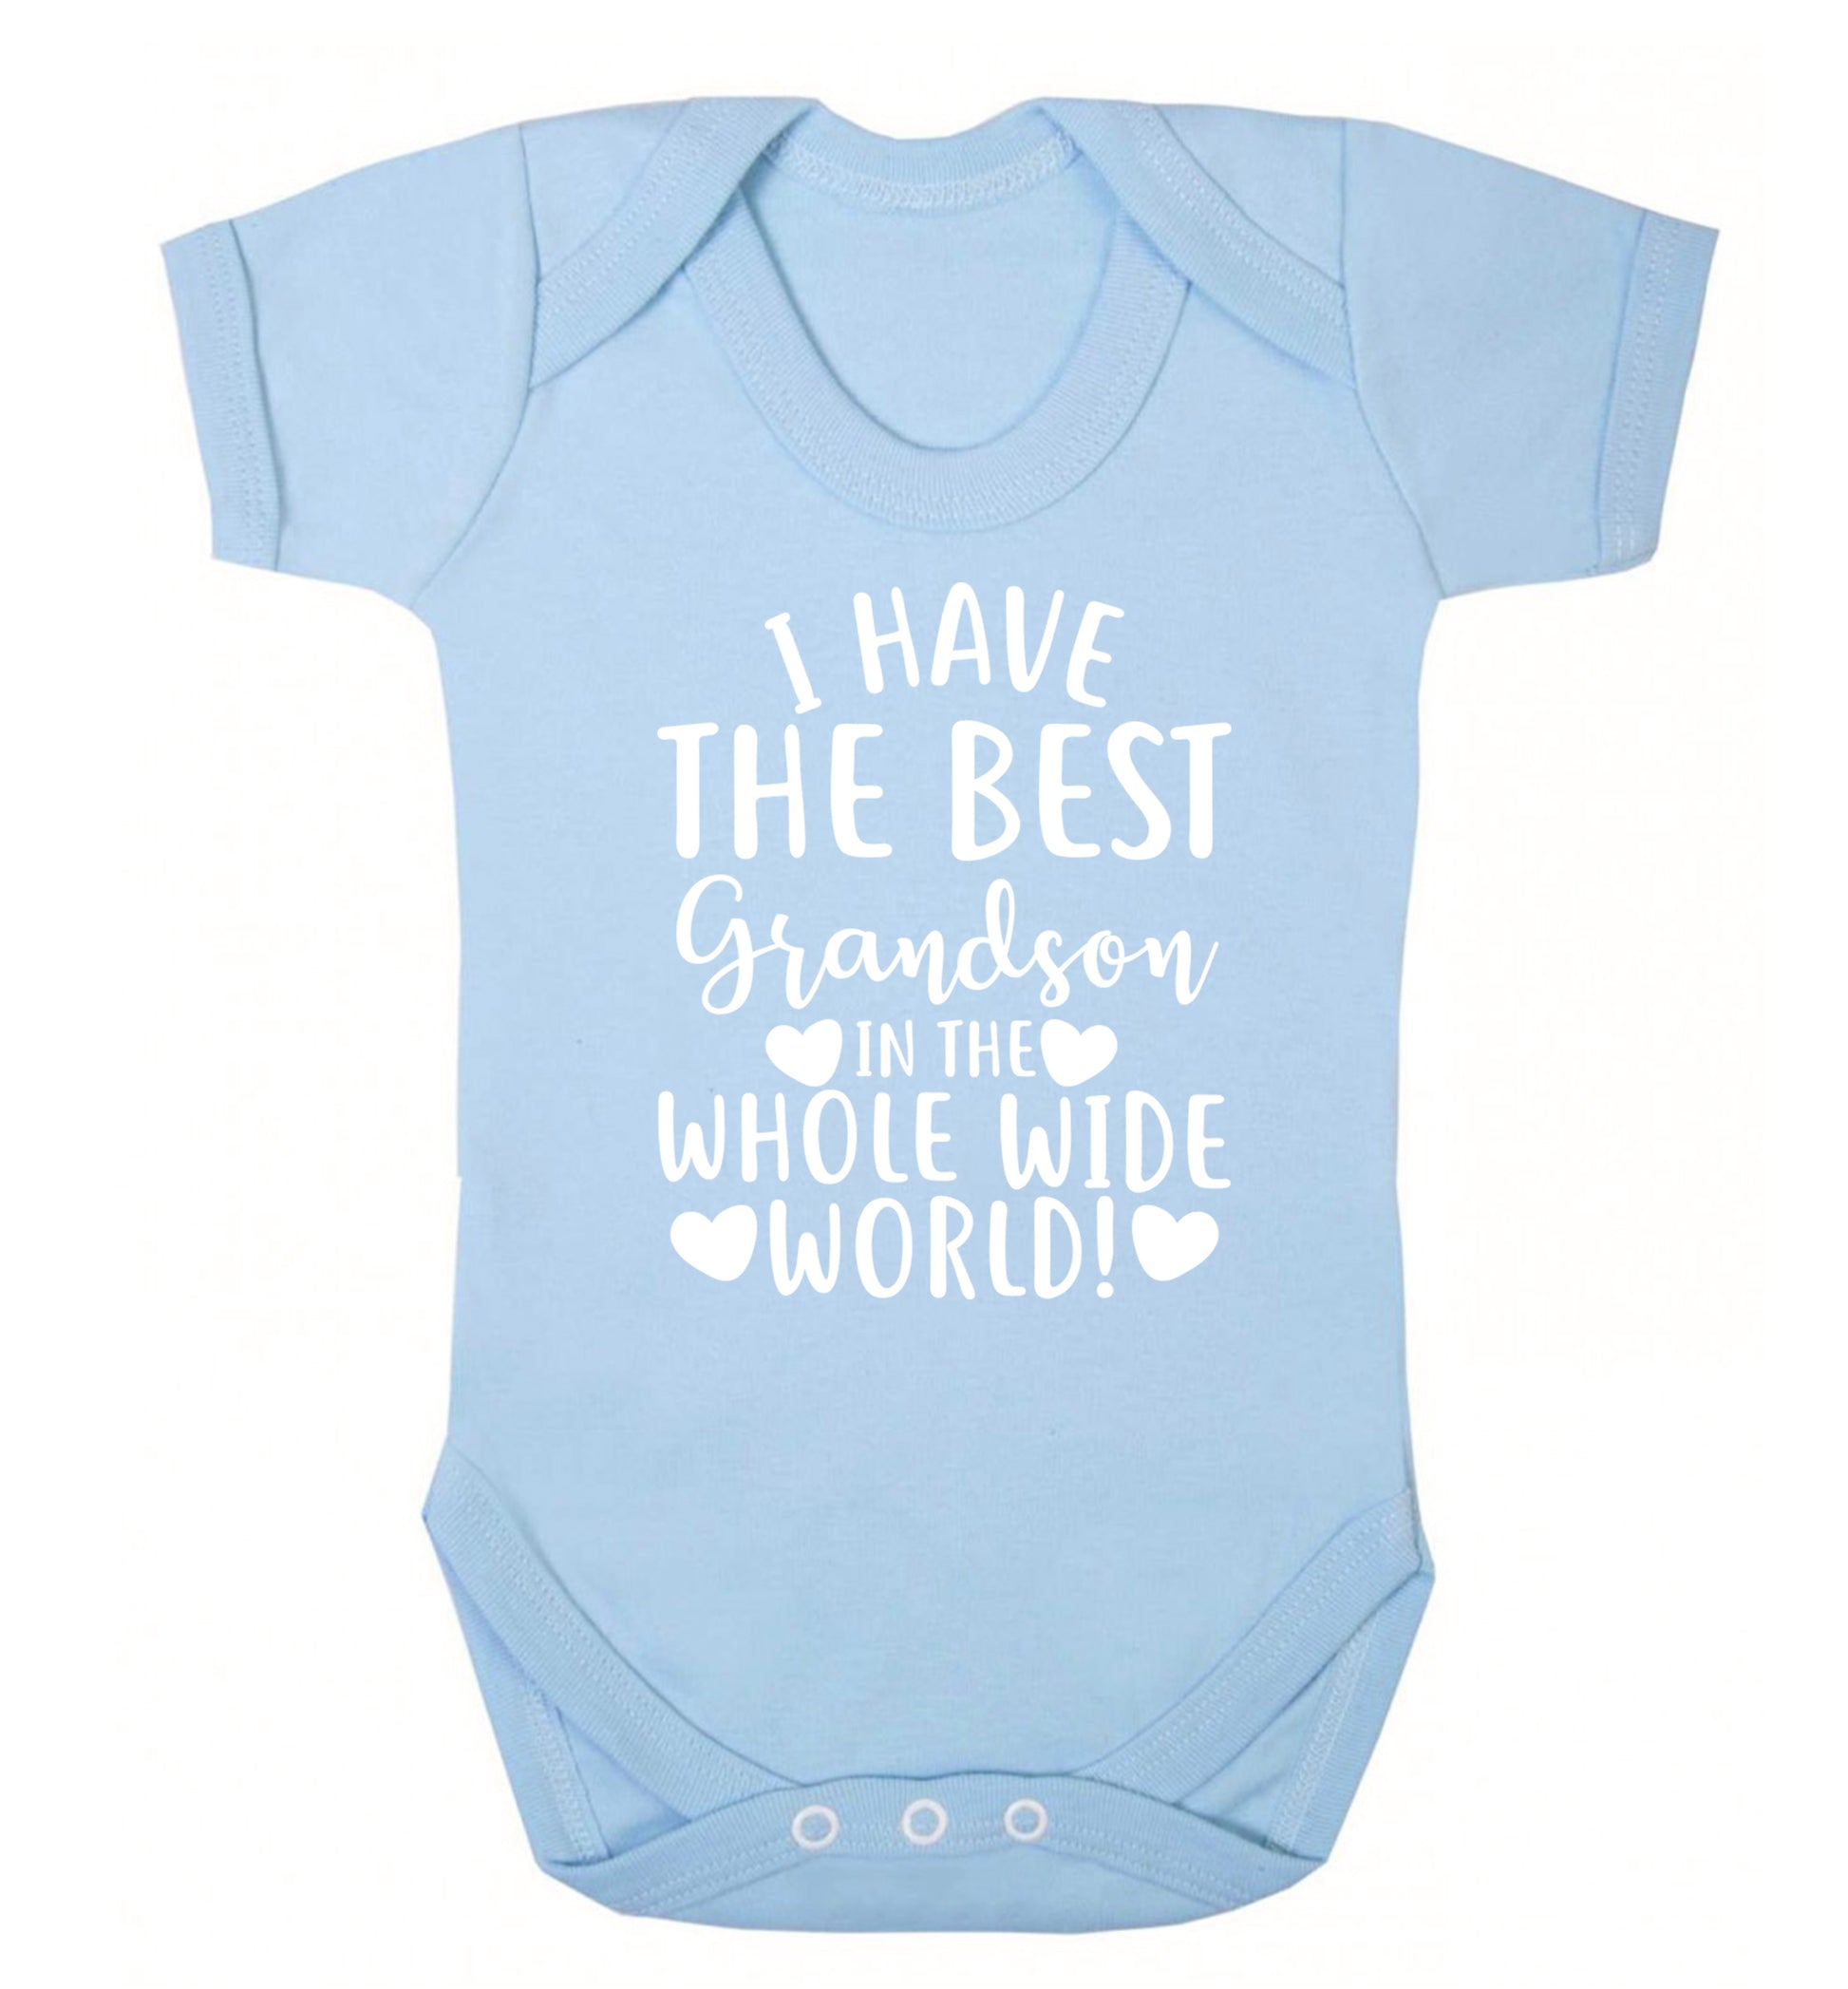 I have the best grandson in the whole wide world! Baby Vest pale blue 18-24 months